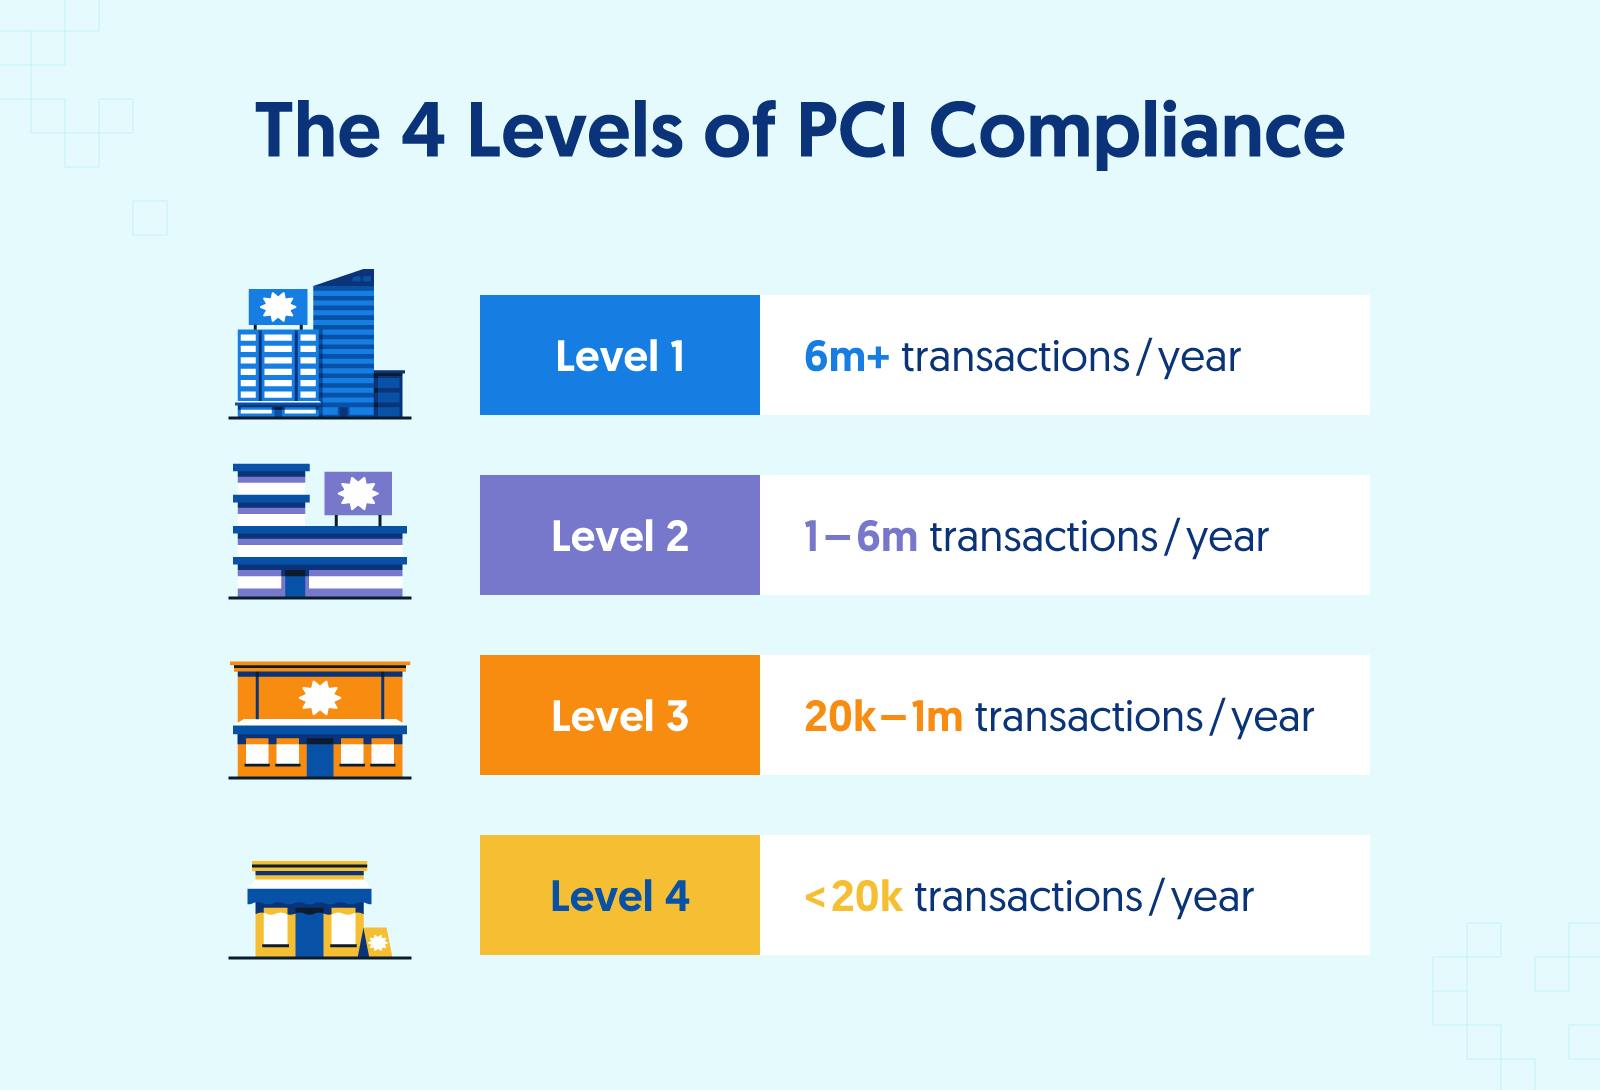 What is the difference between PCI Level 2 and Level 3?